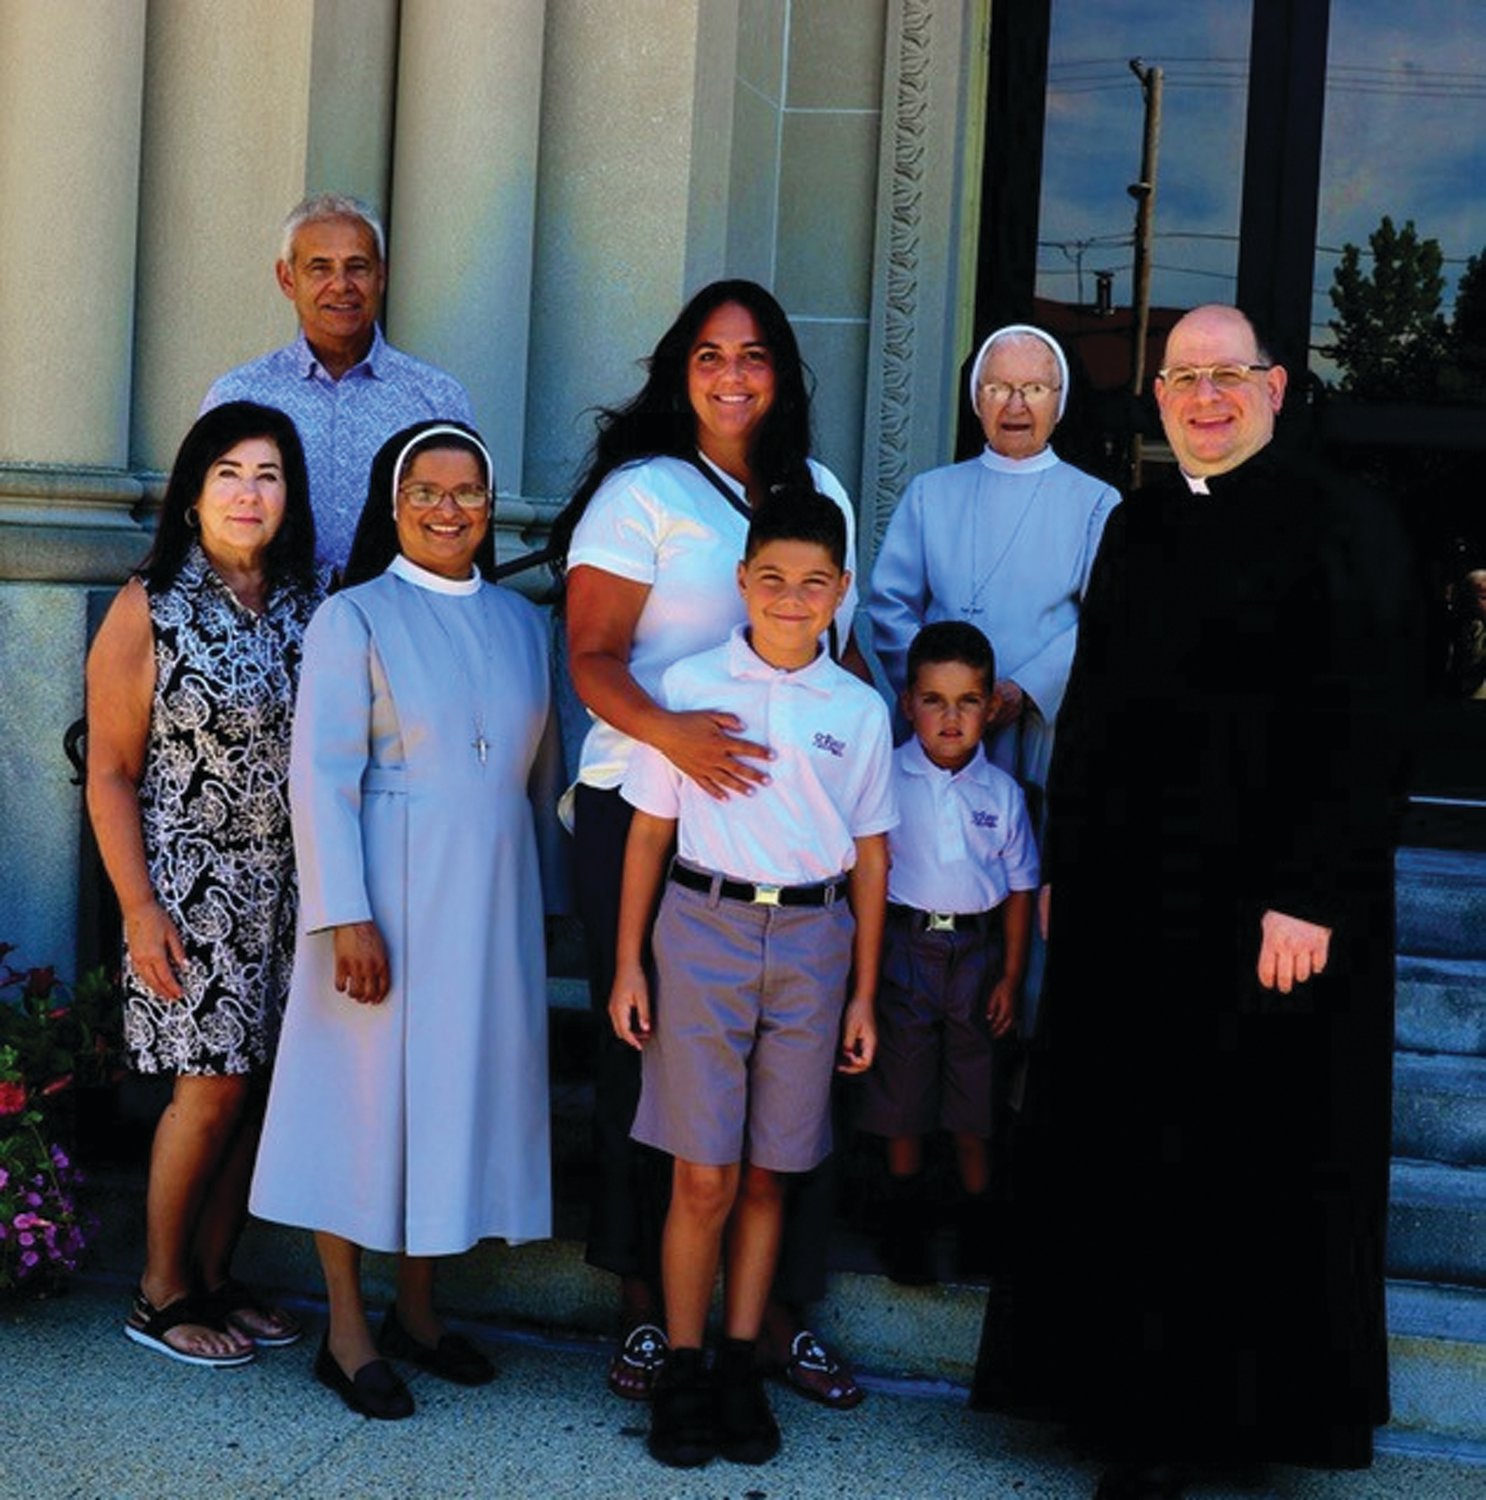 WELCOME WELCOME: Rev. Fr. Carusi Sr., Daisy and Sr. Mary Antoinette welcome the Vieira family to the St. Rocco Feast Mass.